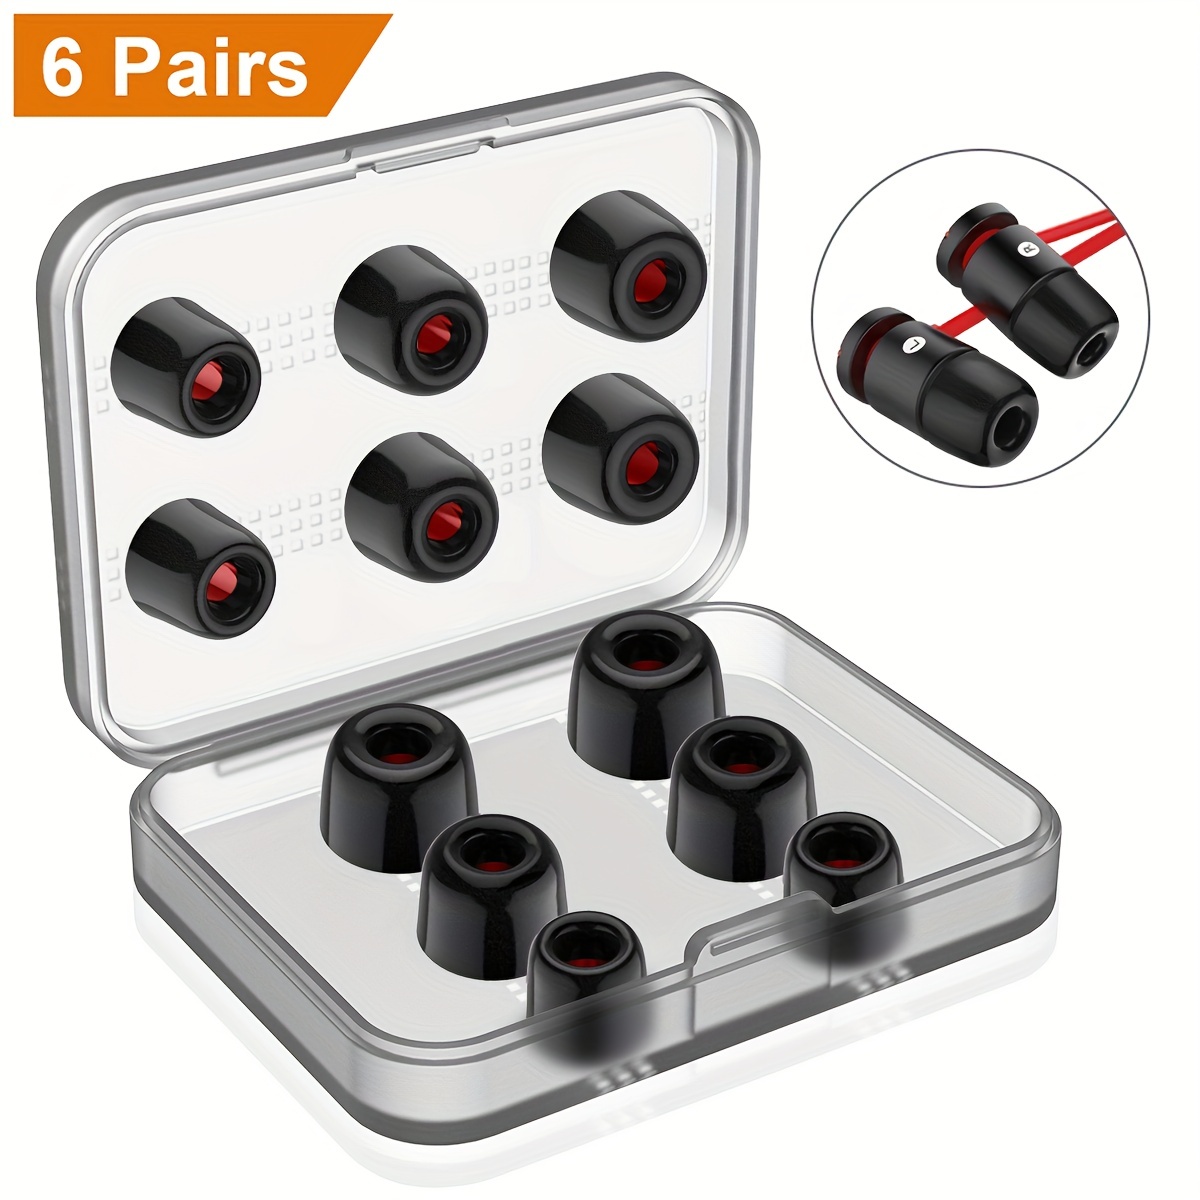 

New Bee 12pcs/set Replacement Ear Tips Premium Memory Foam Earbuds Tips Updated Dustproof Durable Noise Reducing Eartips For Most 4.5-6.3mm In-ear Earphones (s/m/l)(e45)